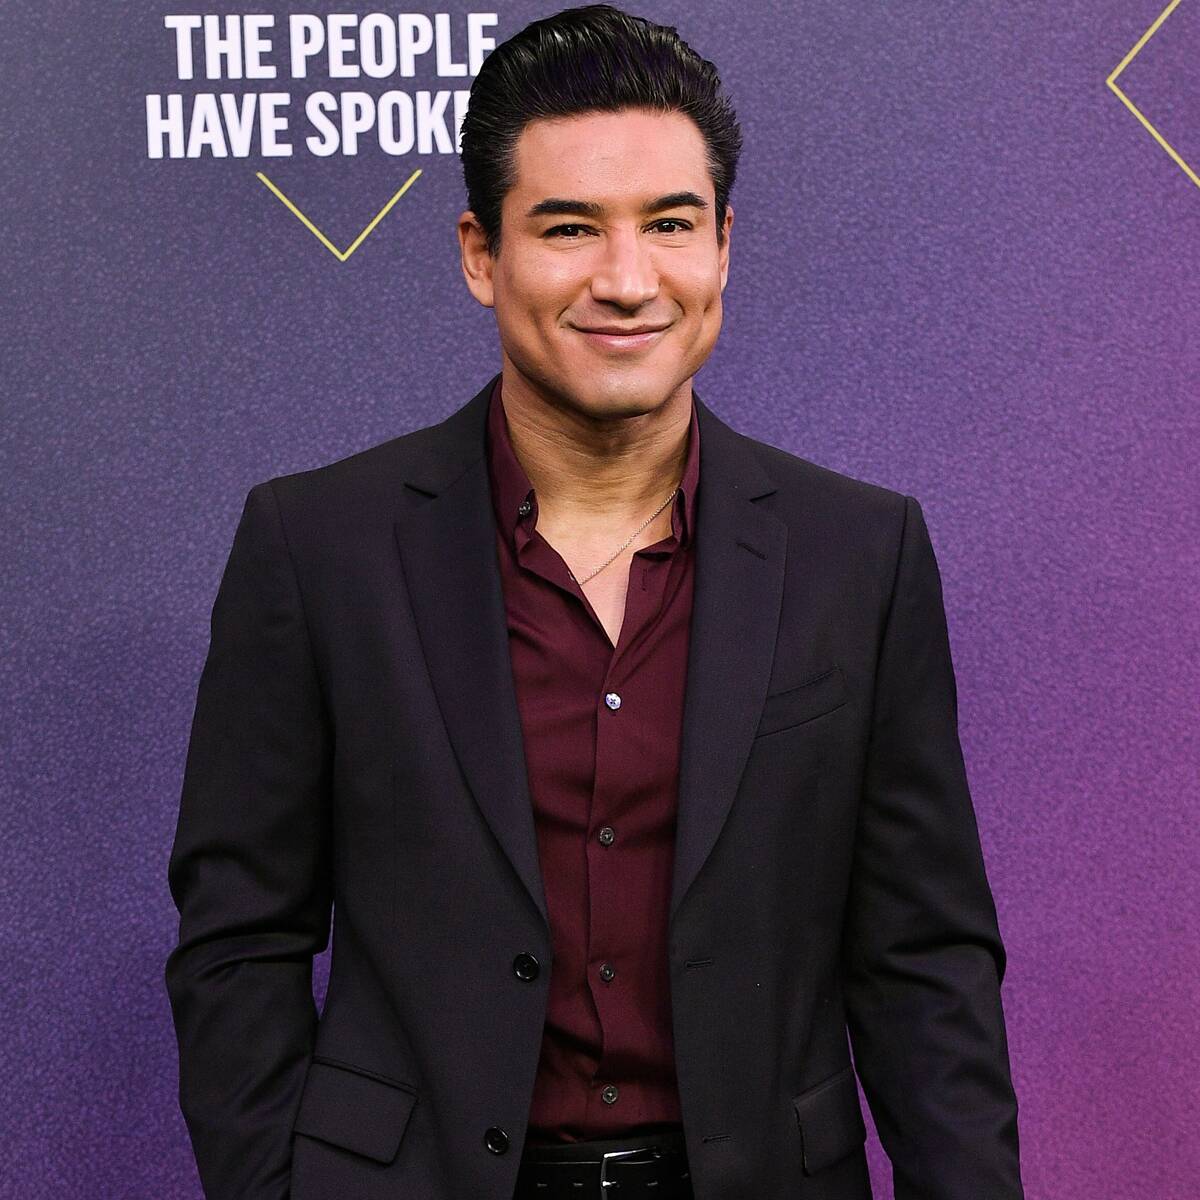 Mario Lopez's Golden Globes Post About Dog Poop Perfectly Sums Up This Past Year